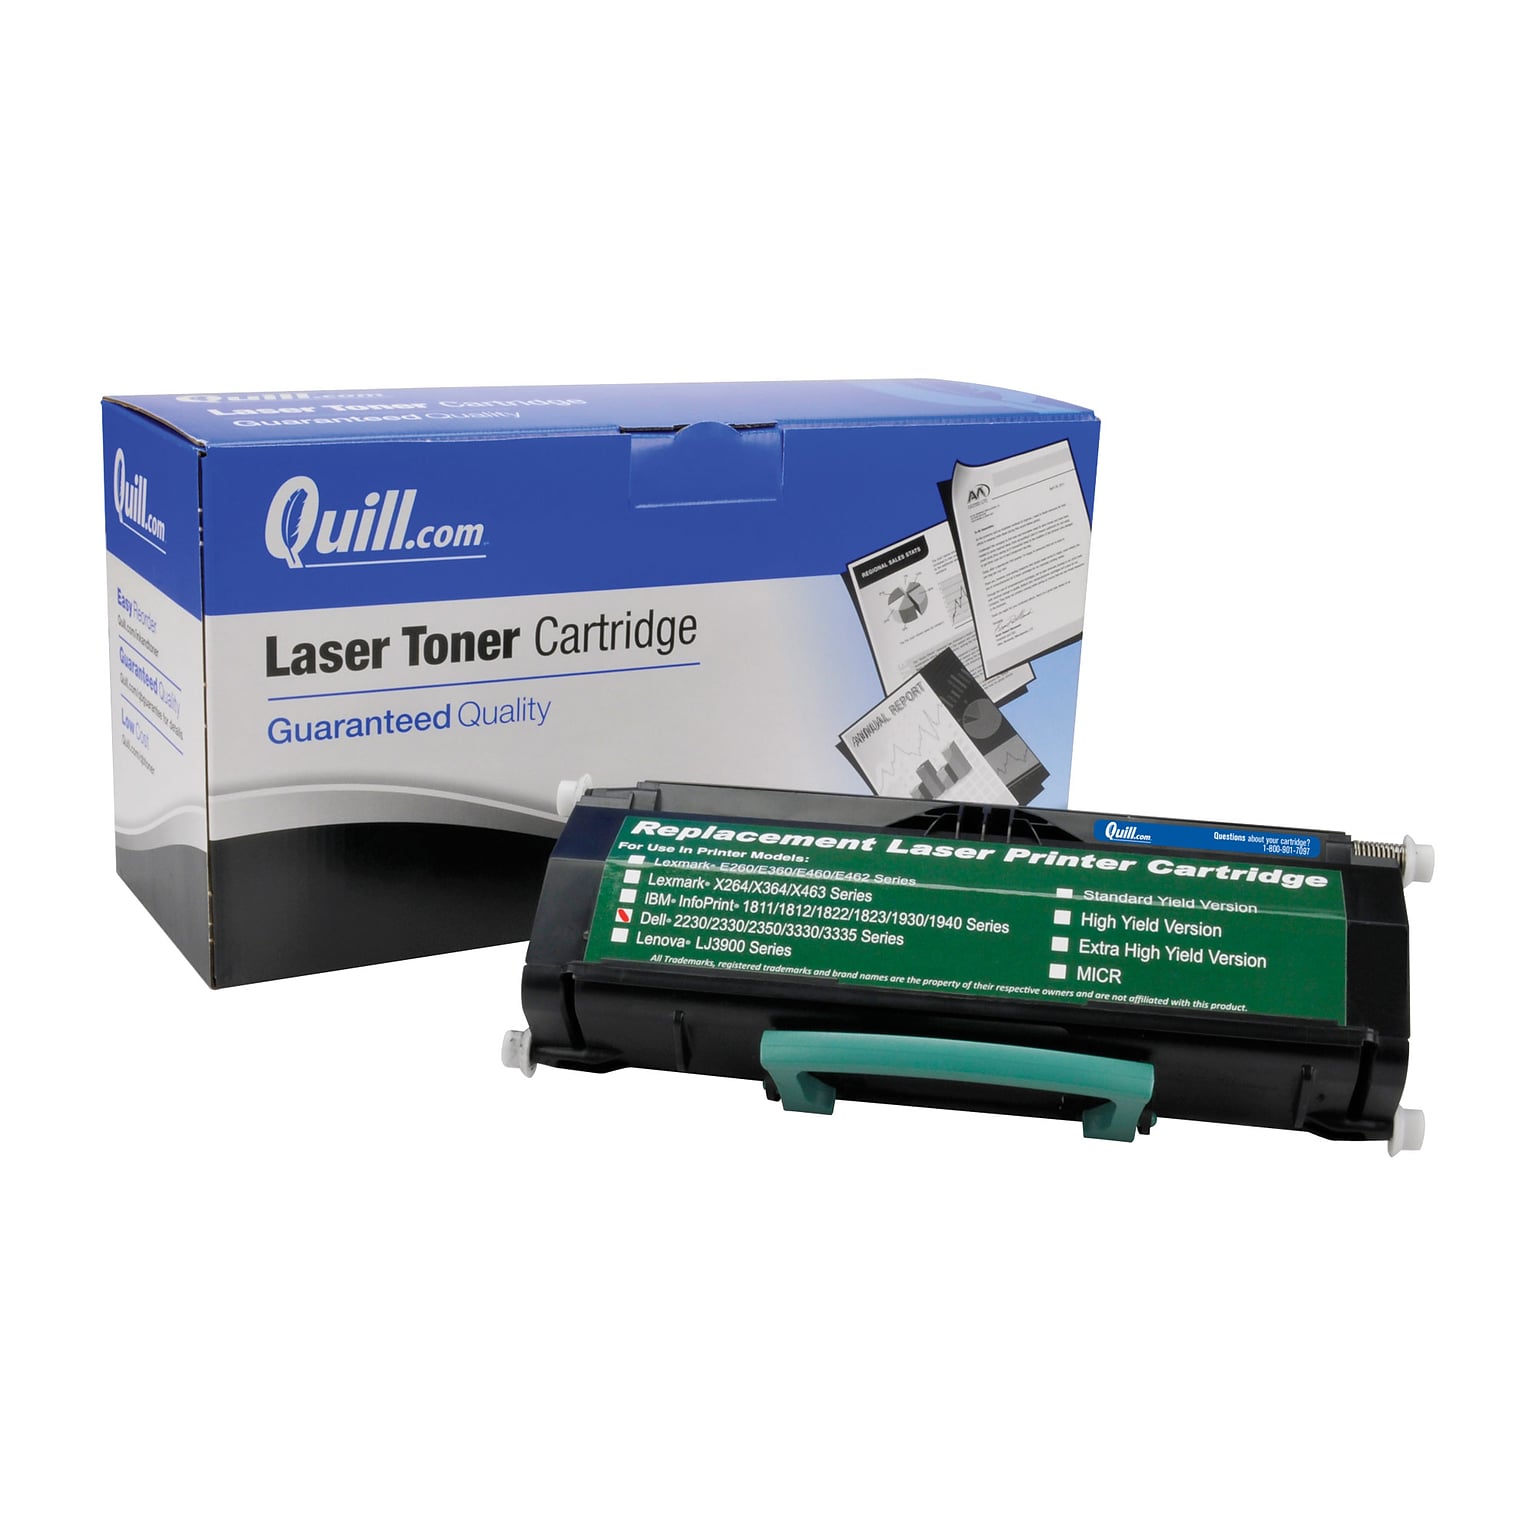 Quill Brand® Remanufactured Black High Yield Laser Toner Cartridge Replacement for Dell PK941 (330-2650) (Lifetime Warranty)